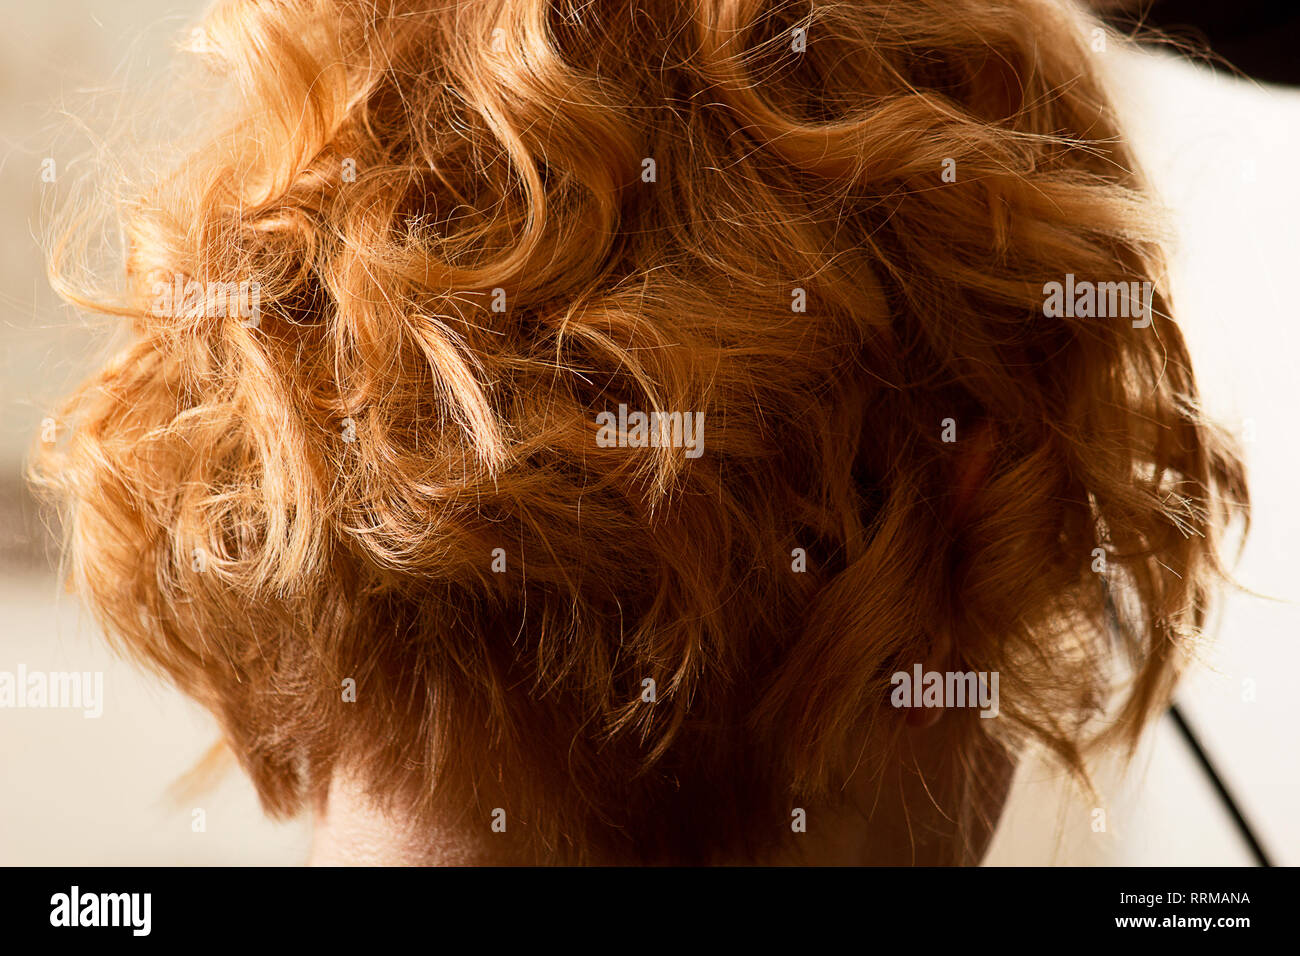 Hairstylist Curl Short Hair With Flat Iron Stock Photo Alamy